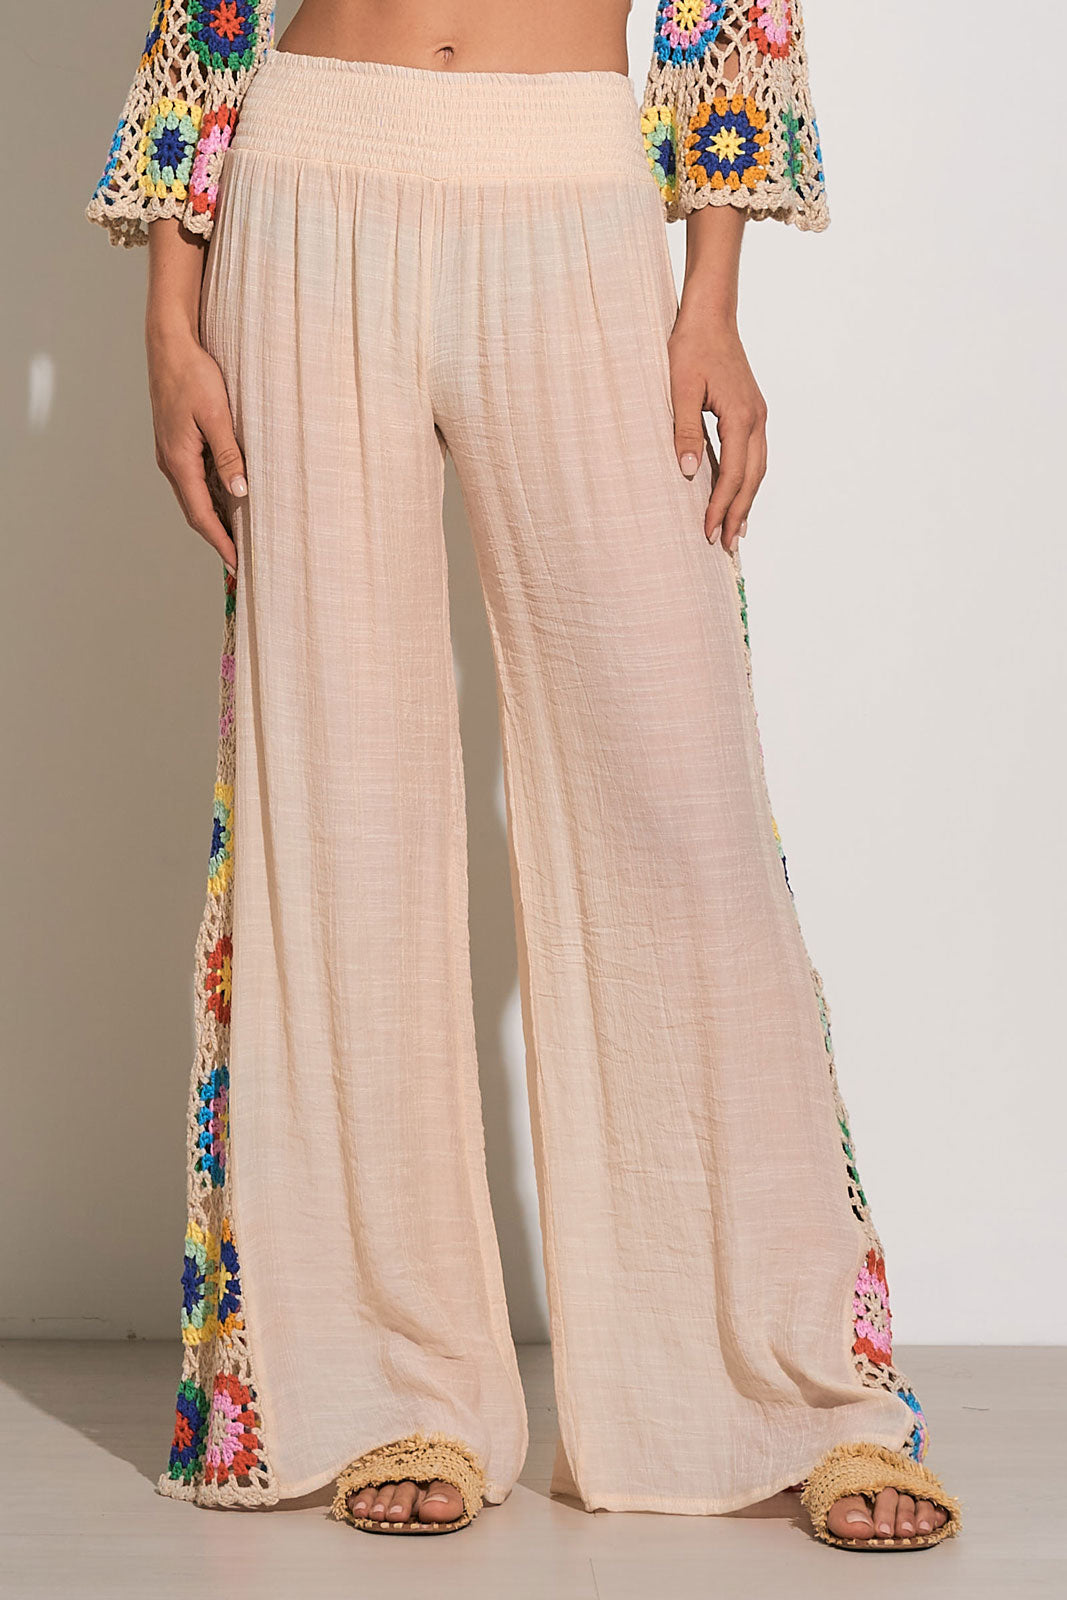 Front view of tan, wide leg pants with multicolor crochet details at the side and an elastic waistband